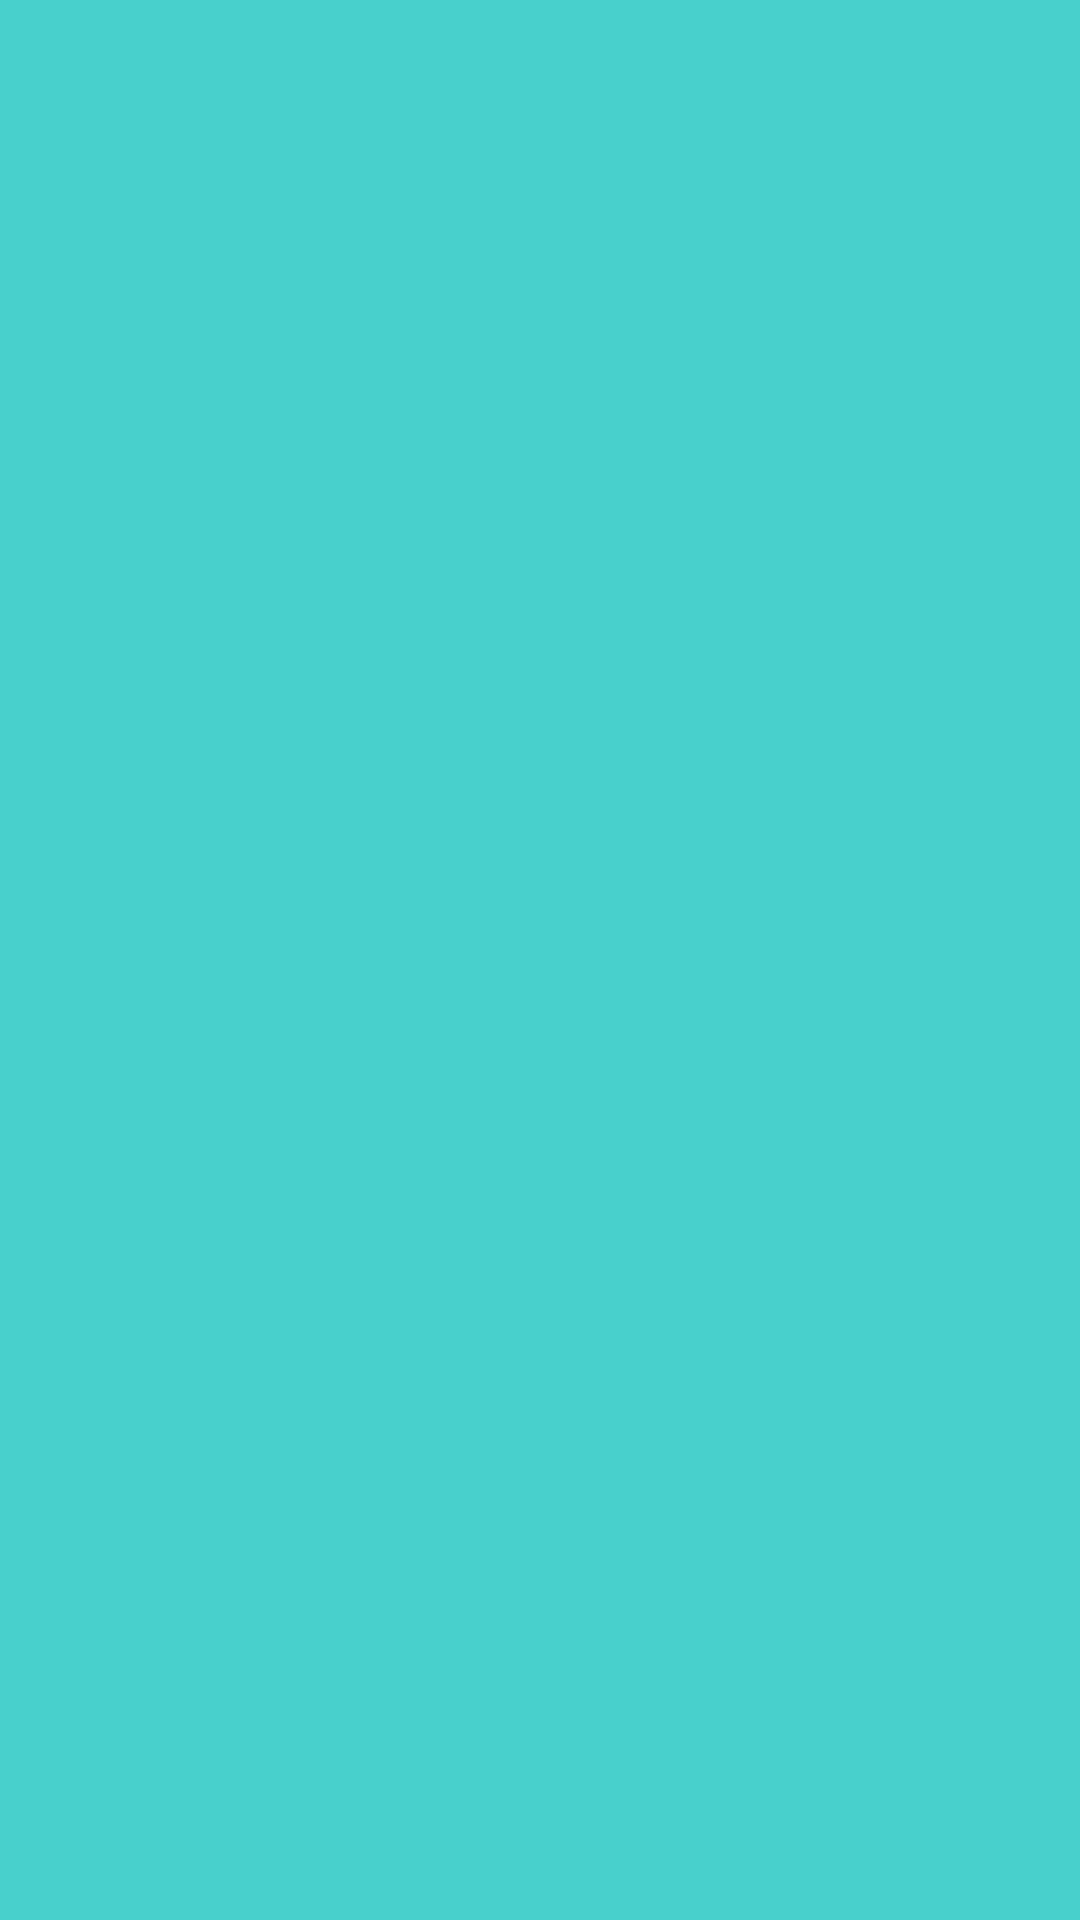 1080x1920 Medium Turquoise Solid Color Background